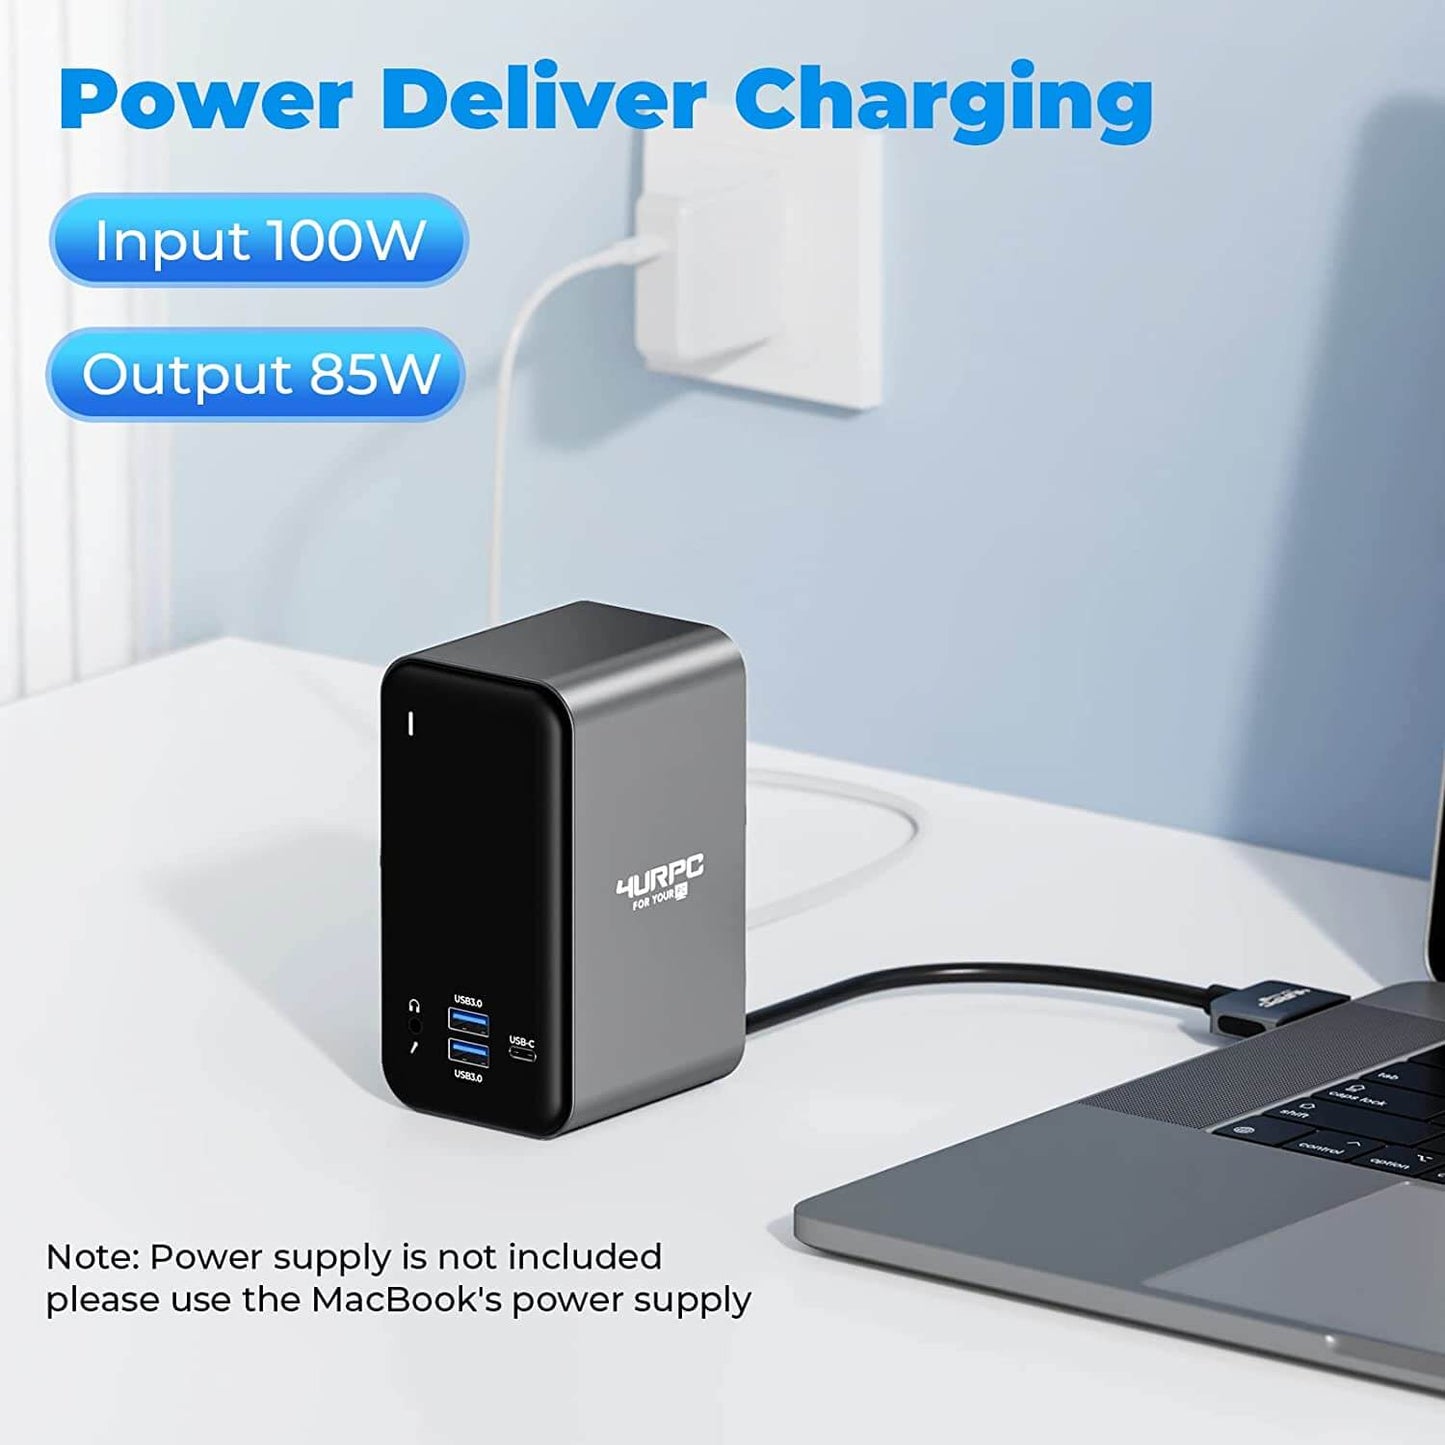 Up to 87W Charging with 4URPC DS-C03 Dual Monitor Docking Station